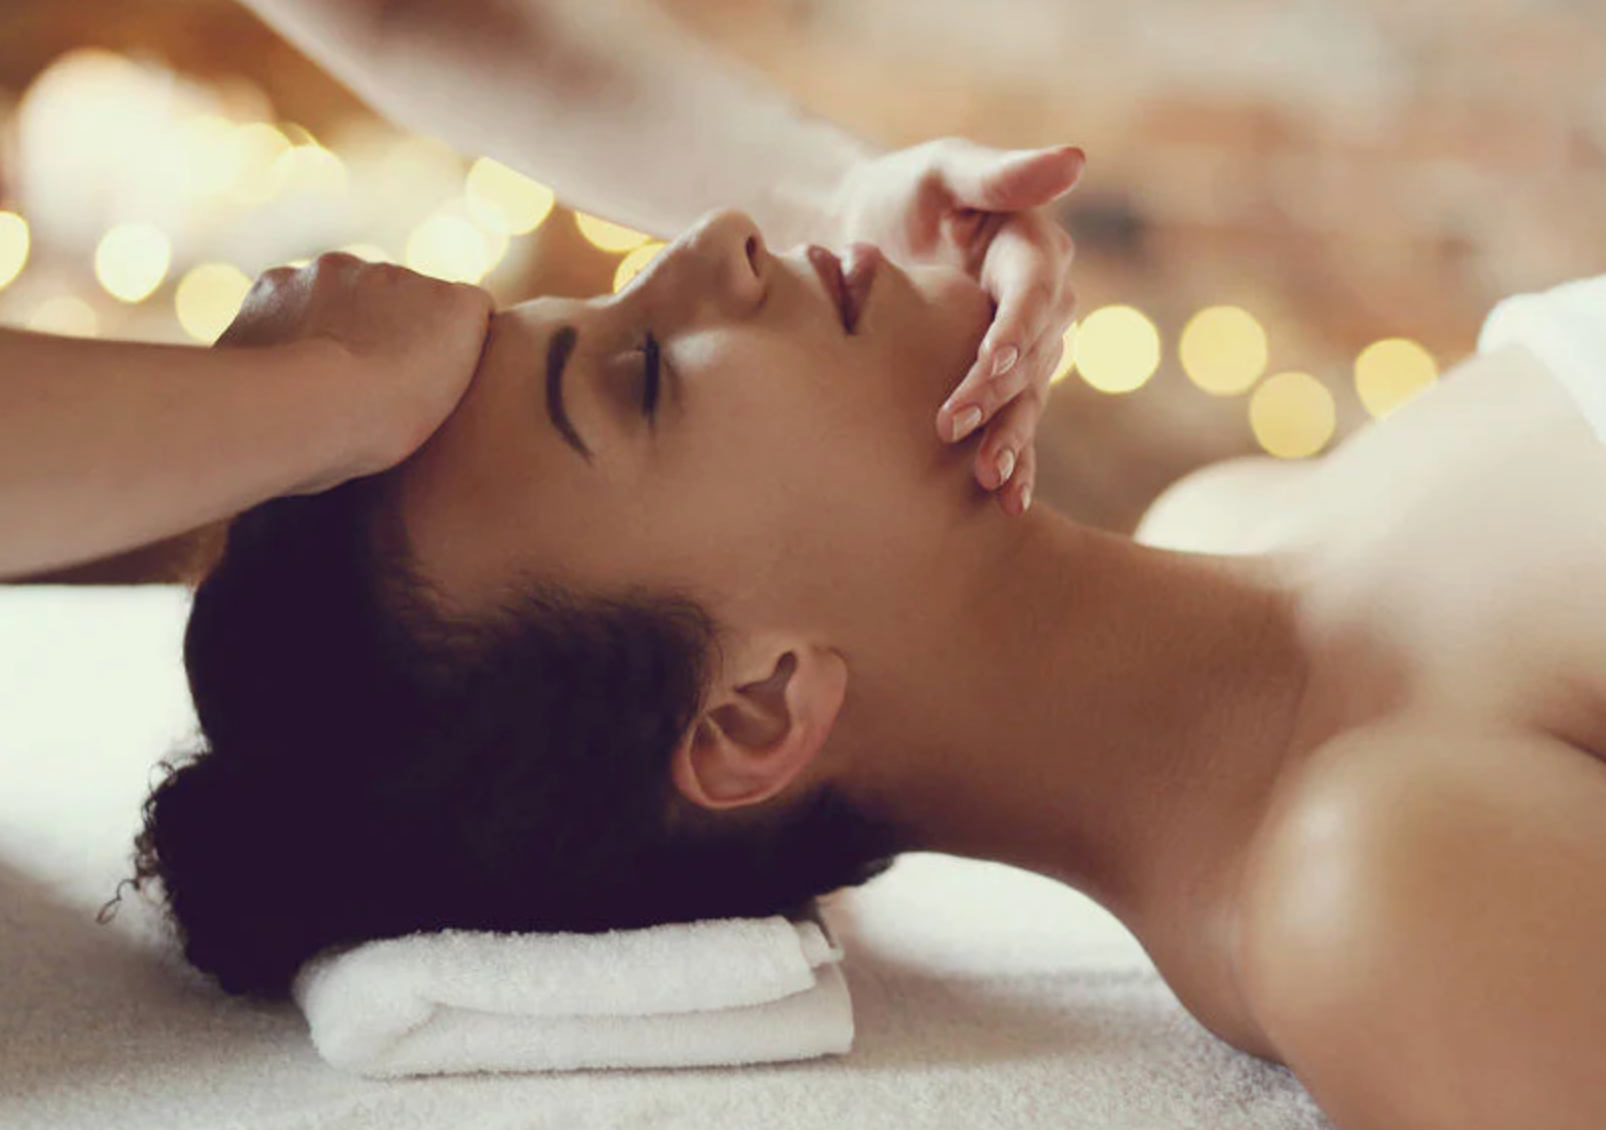 Why Do I Feel Very Emotional After a Massage?